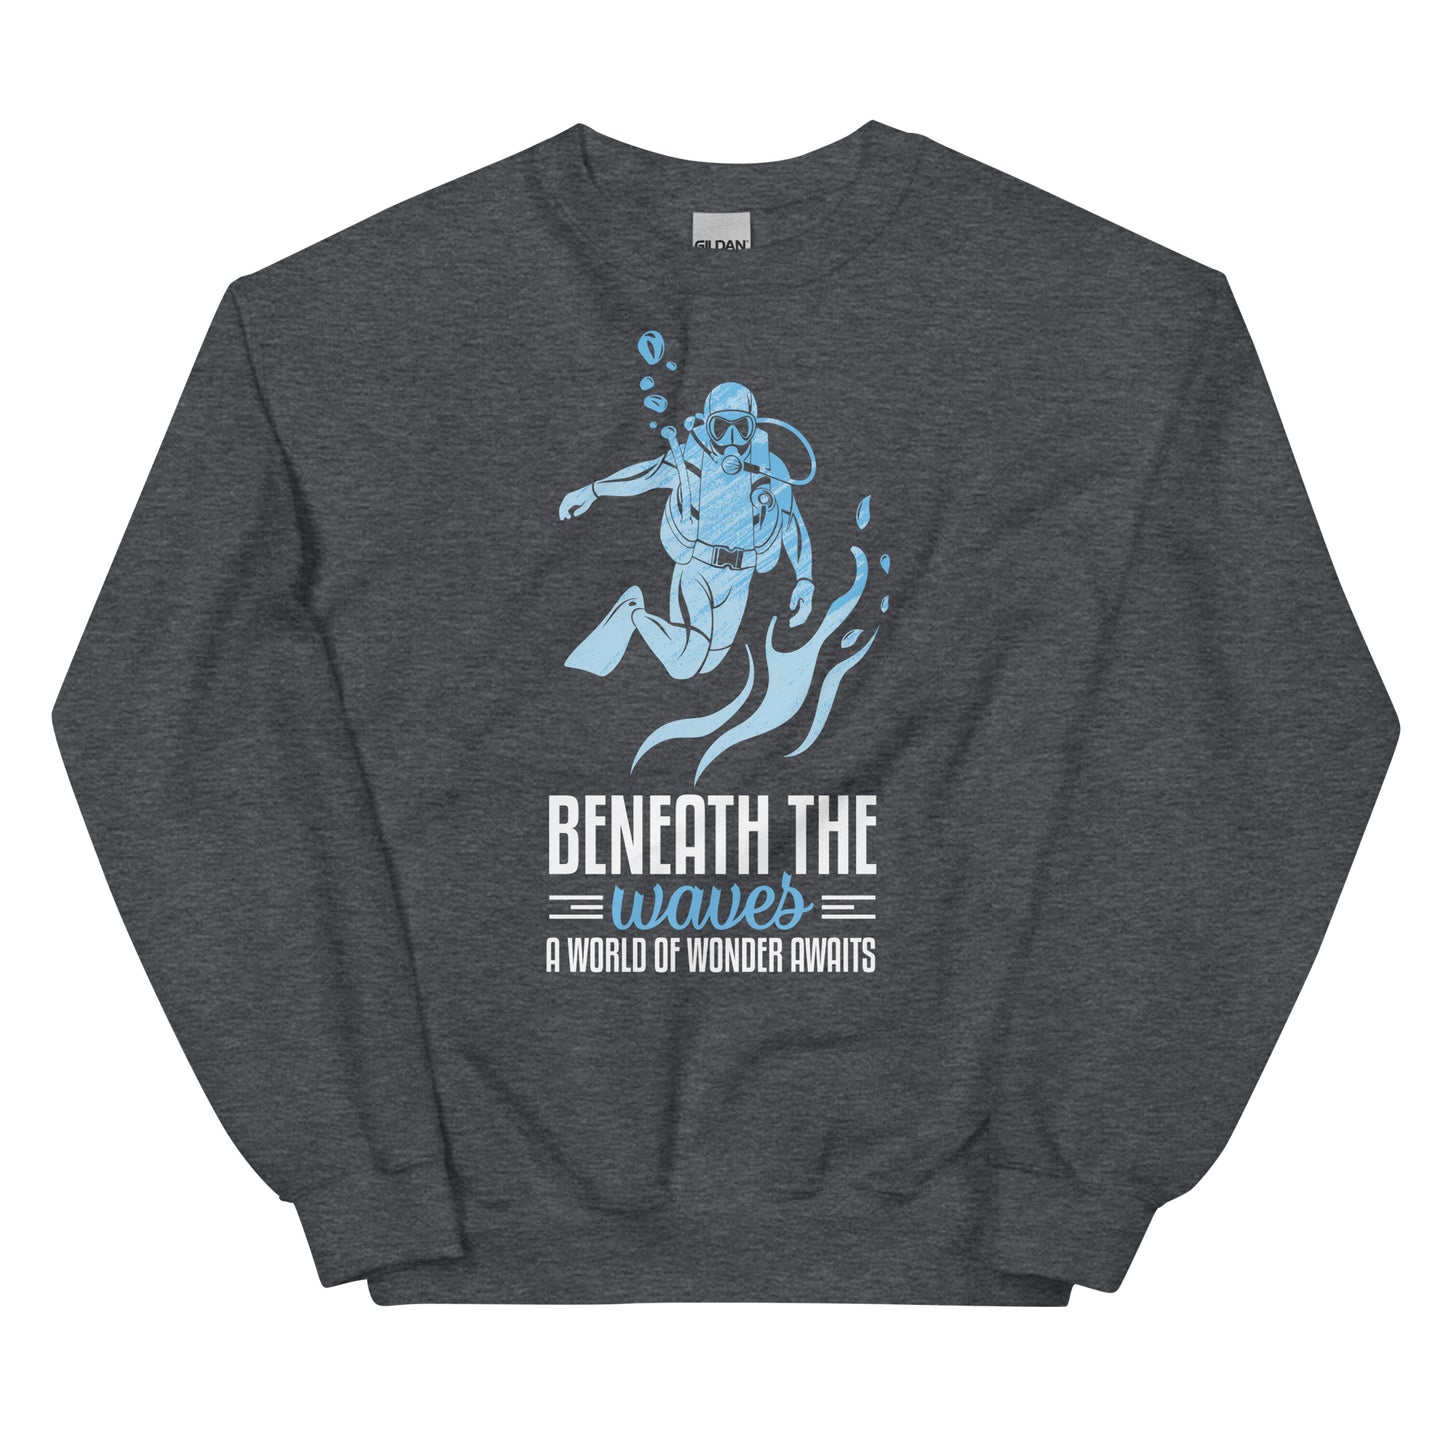 Beneath the Waves a World of Wonder awaits Pullover